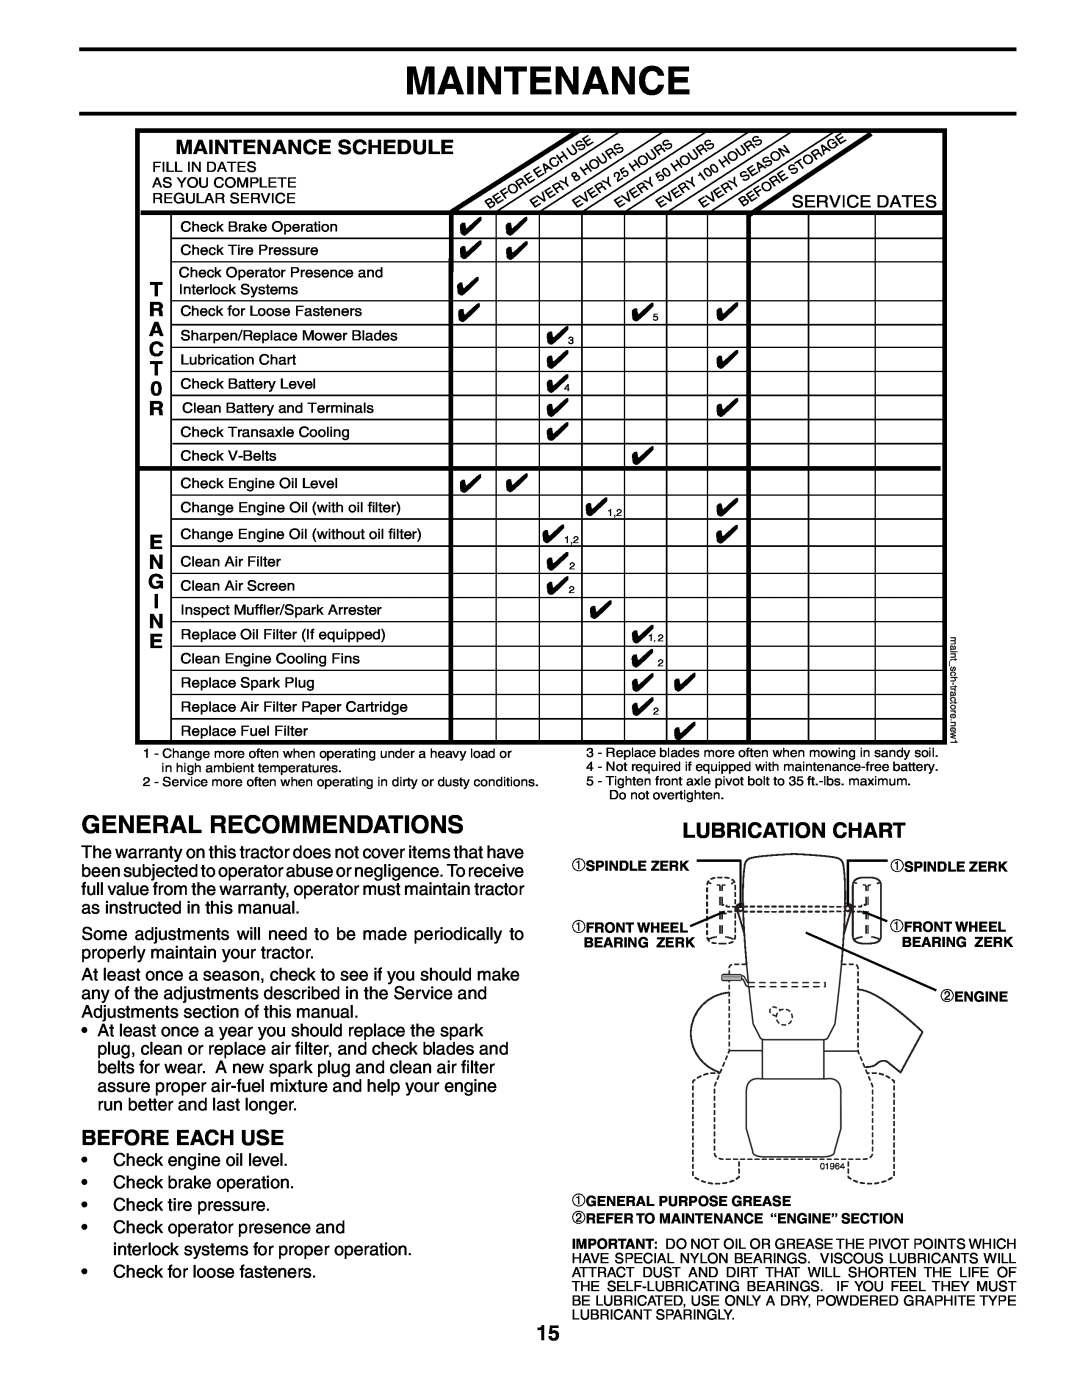 Poulan PO175H42STB manual General Recommendations, Before Each Use, Lubrication Chart, Maintenance Schedule 